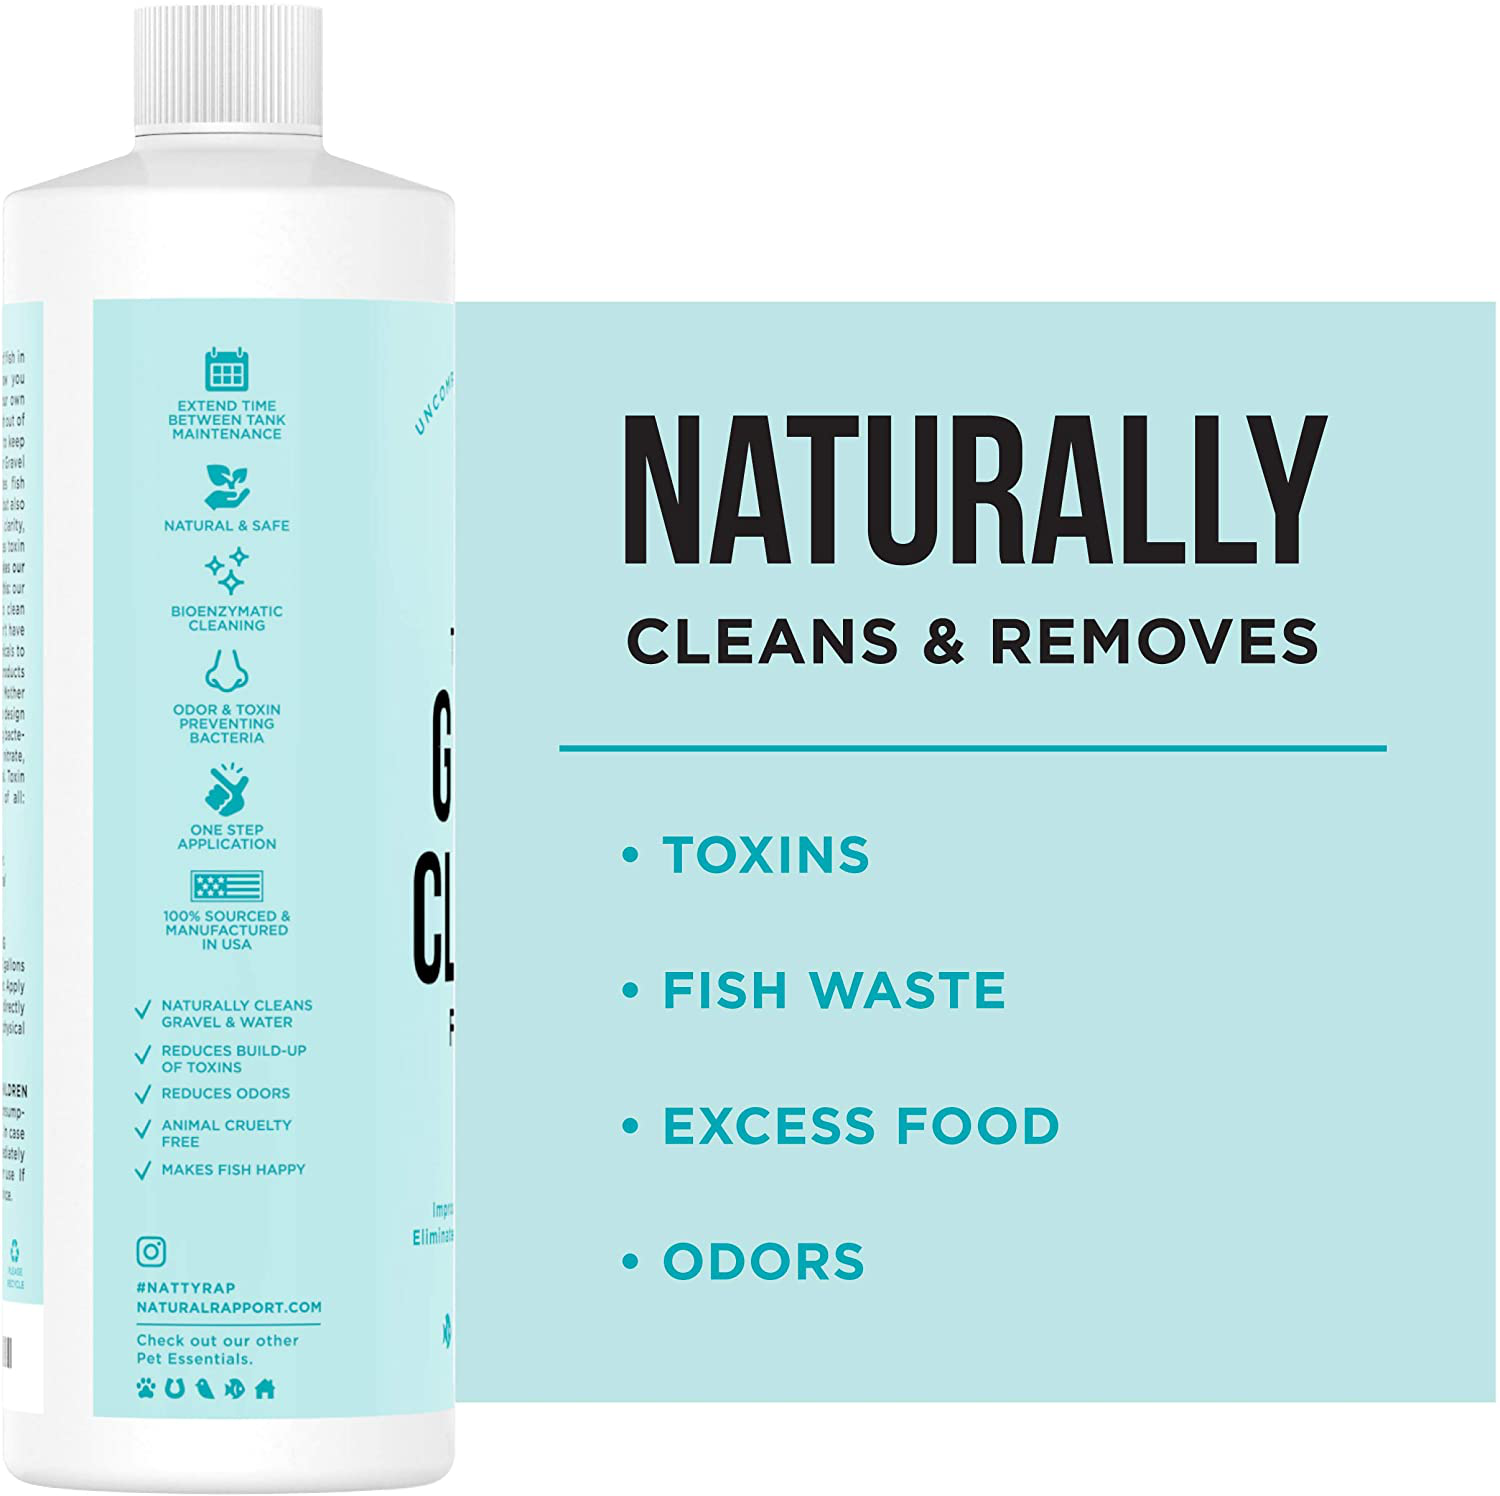 Natural Rapport Aquarium Gravel Cleaner - the Only Gravel Cleaner Fish Need - Professional Aquarium Gravel Cleaner to Naturally Maintain a Healthier Tank, Reducing Fish Waste and Toxins (16 Fl Oz)